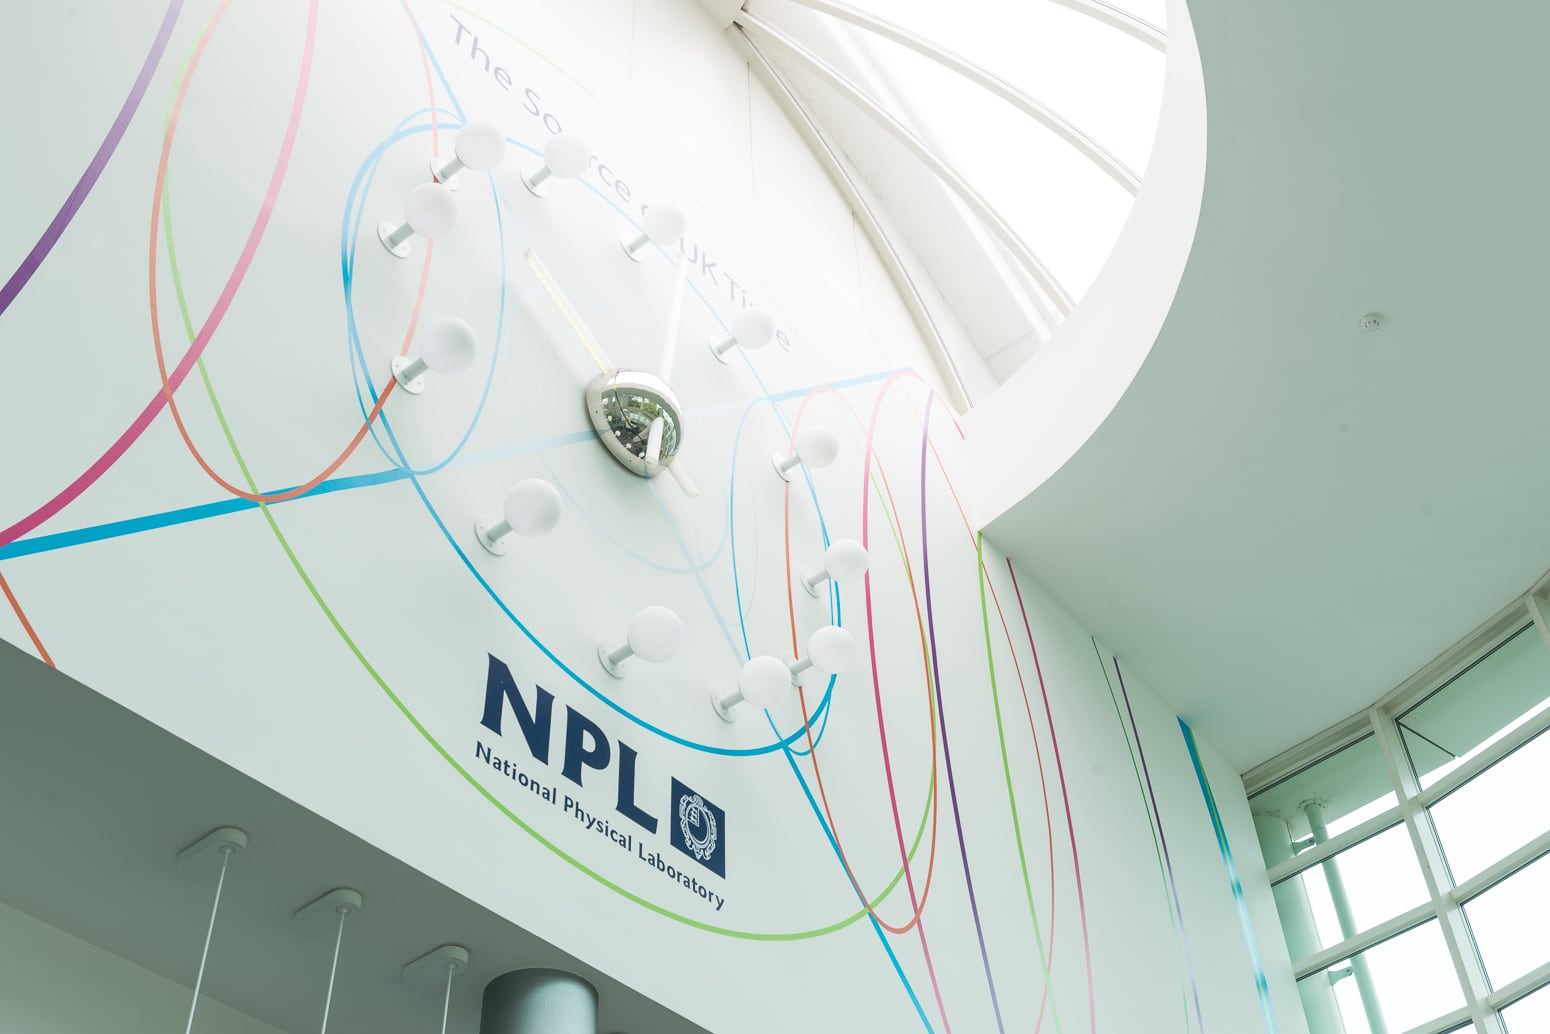 Image of NPL wall clock in main reception